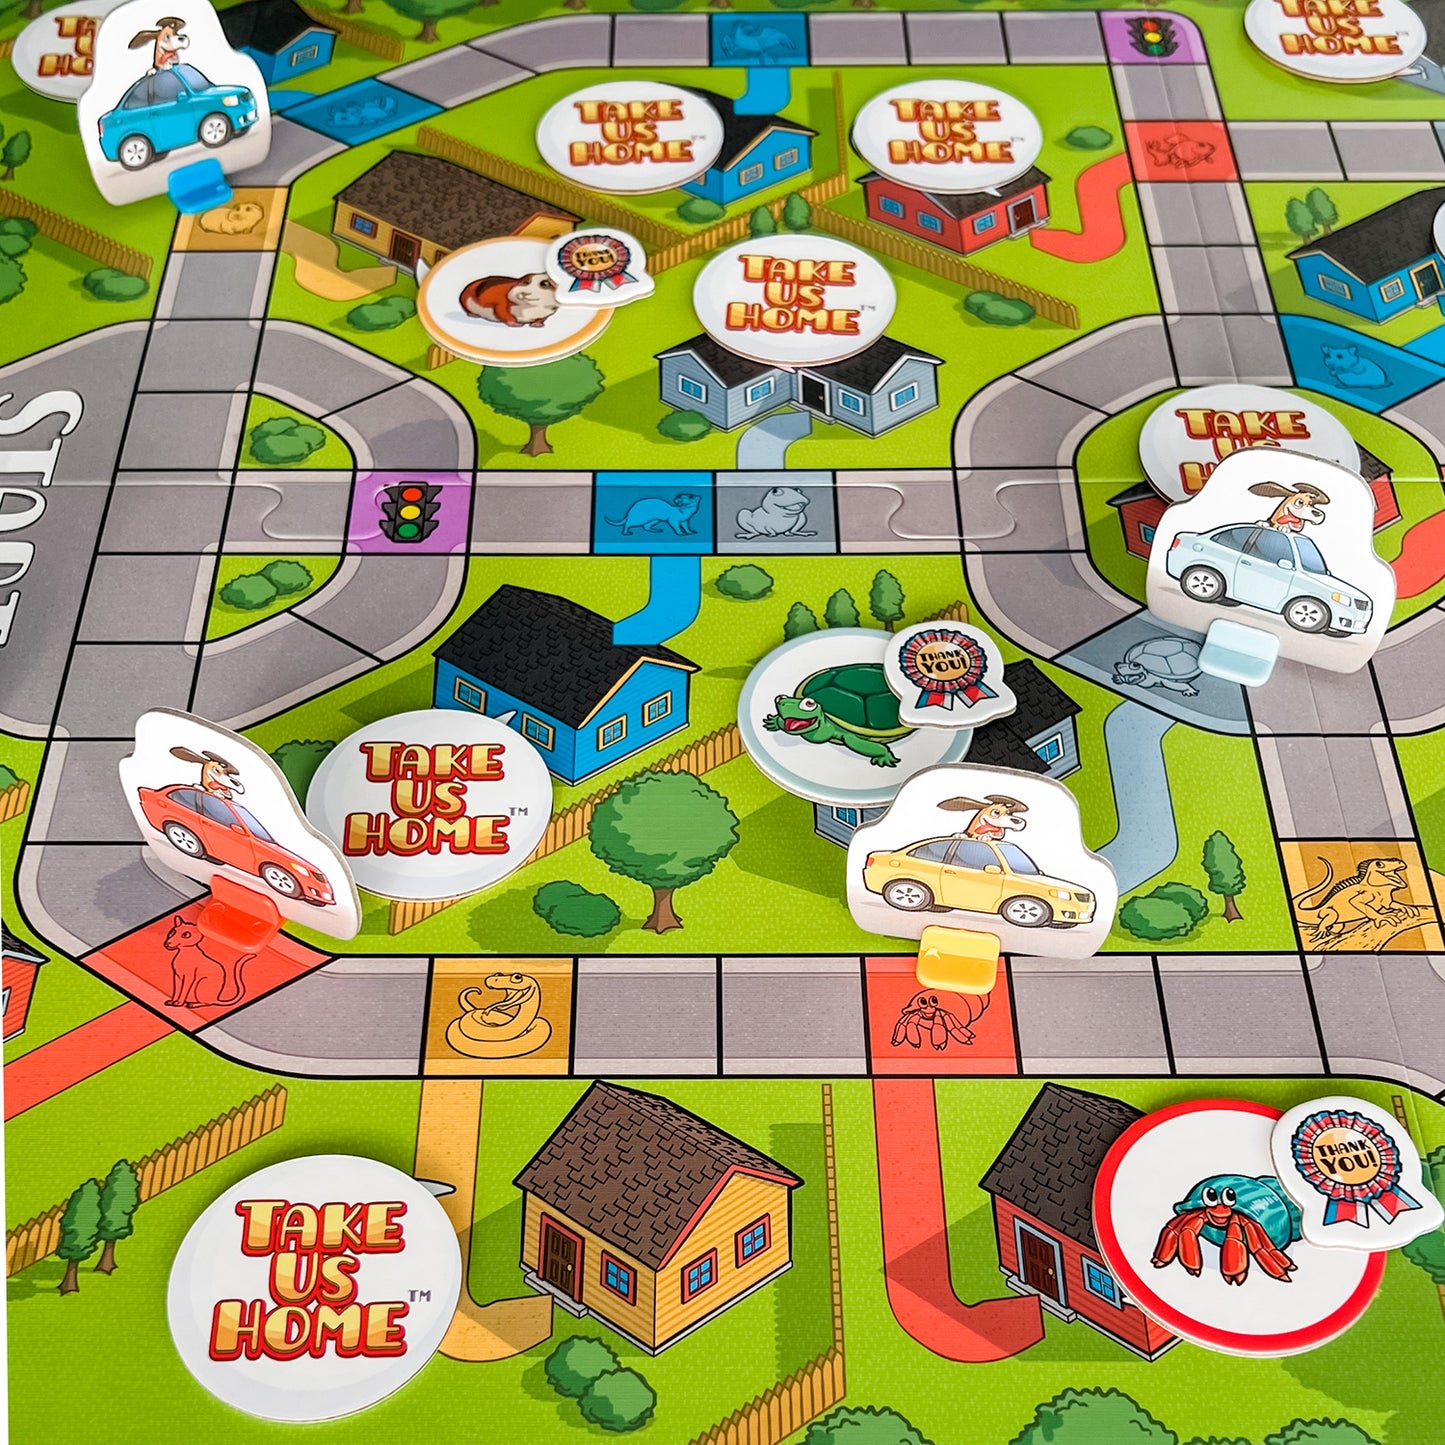 Take Us Home by SimplyFun is a fun pet game focusing on counting and matching for ages 5 and up.